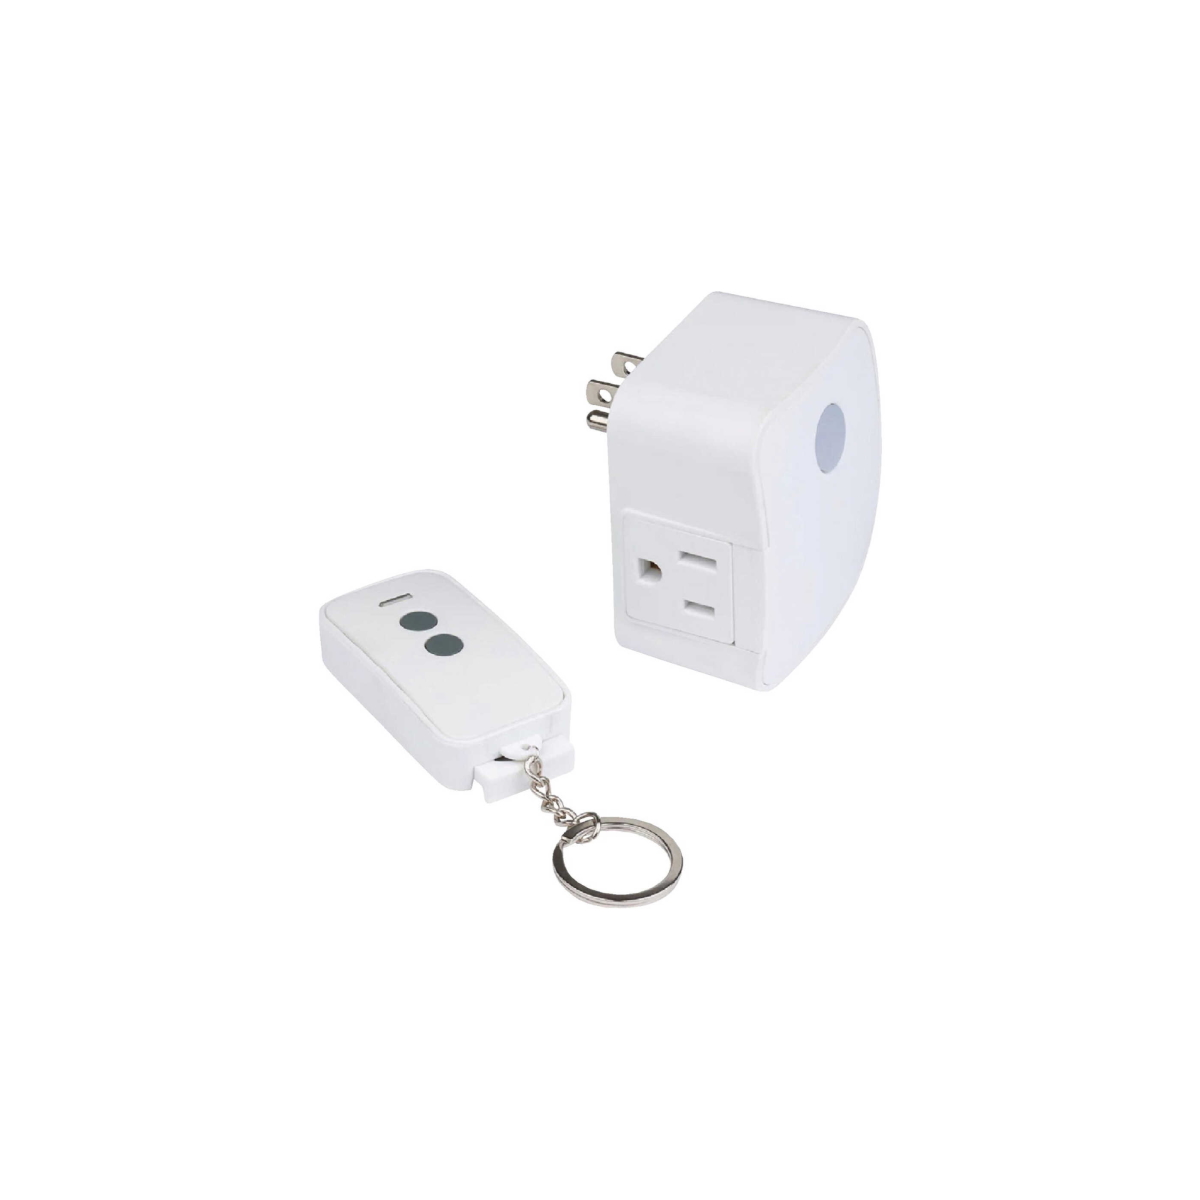 Westek Remote Control Light Switch for Indoor Devices